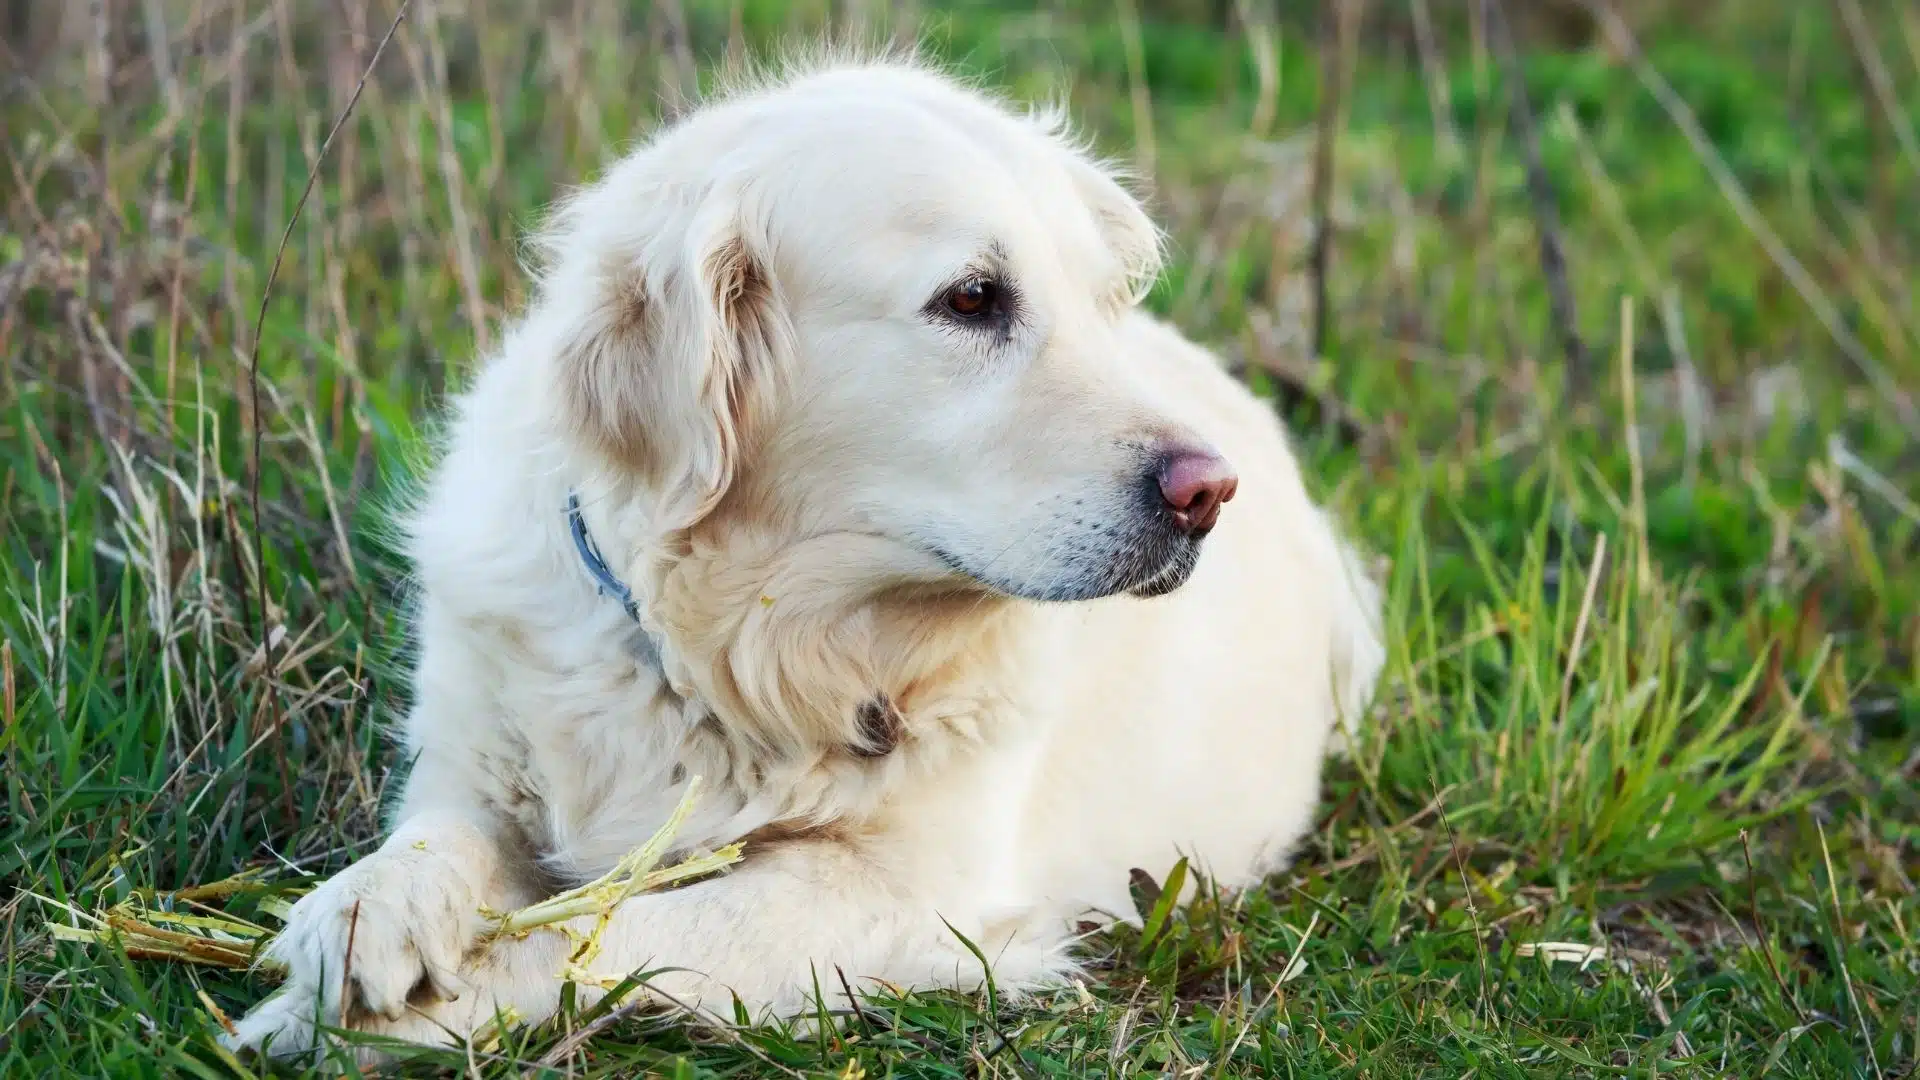 Things You Should Know About Owning a Golden Retriever - PetHelpful